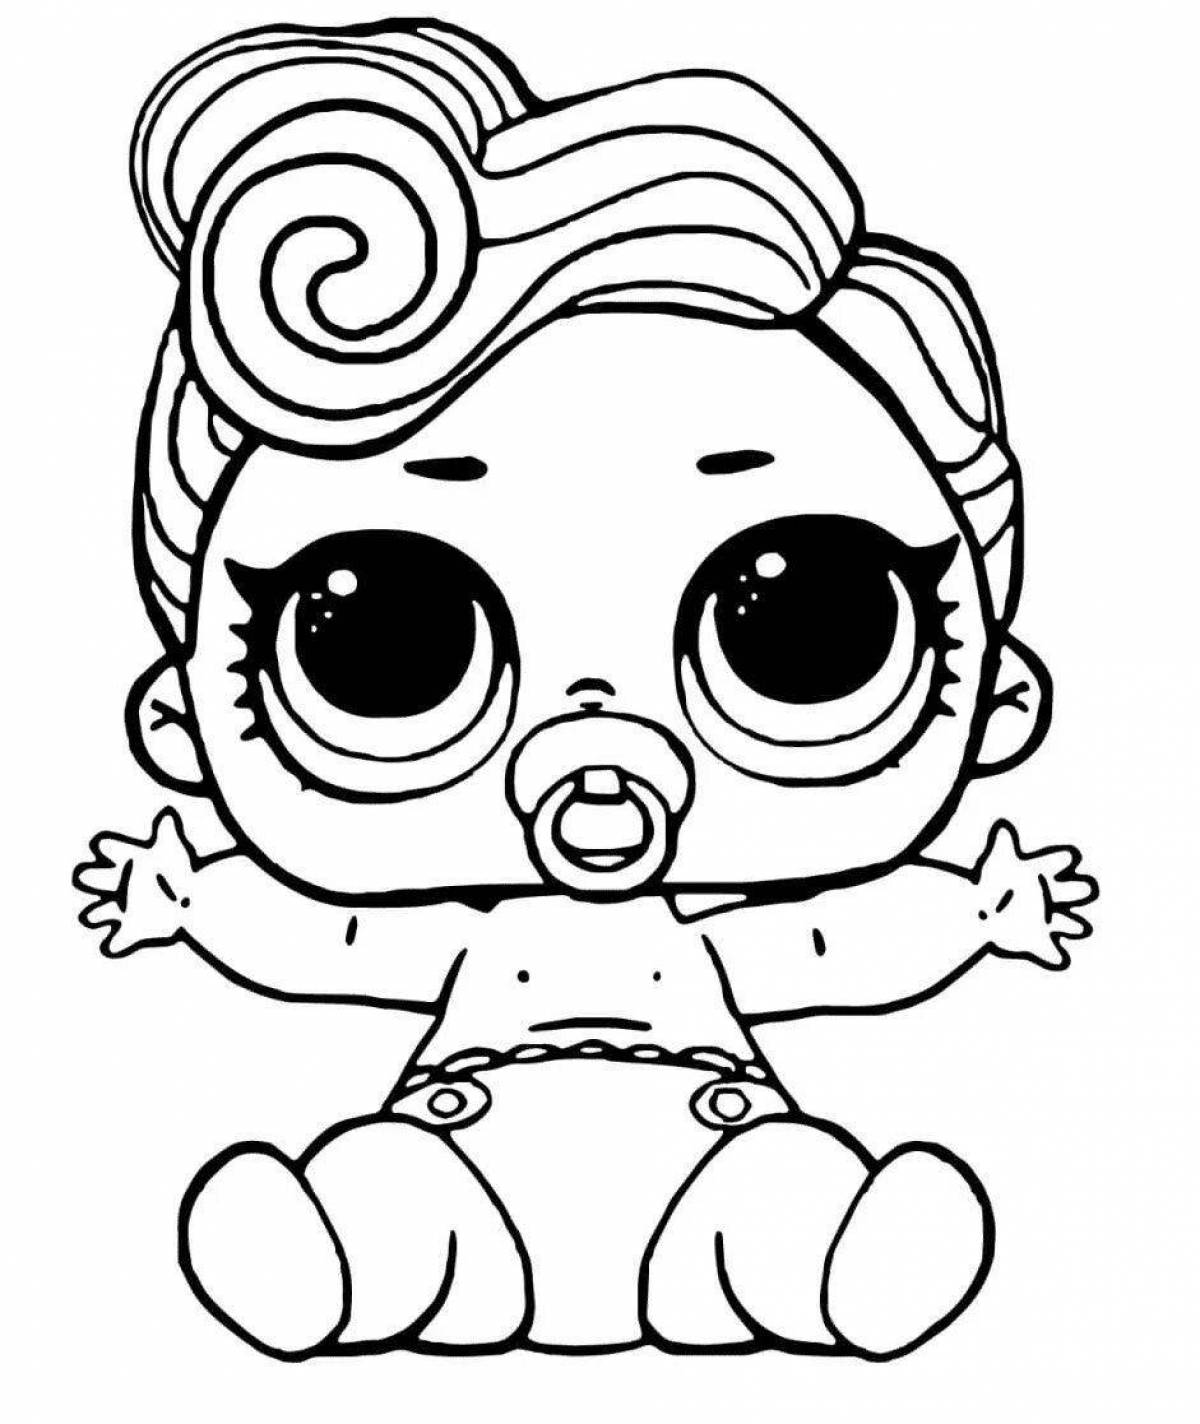 Coloring book for girls doll lol #6